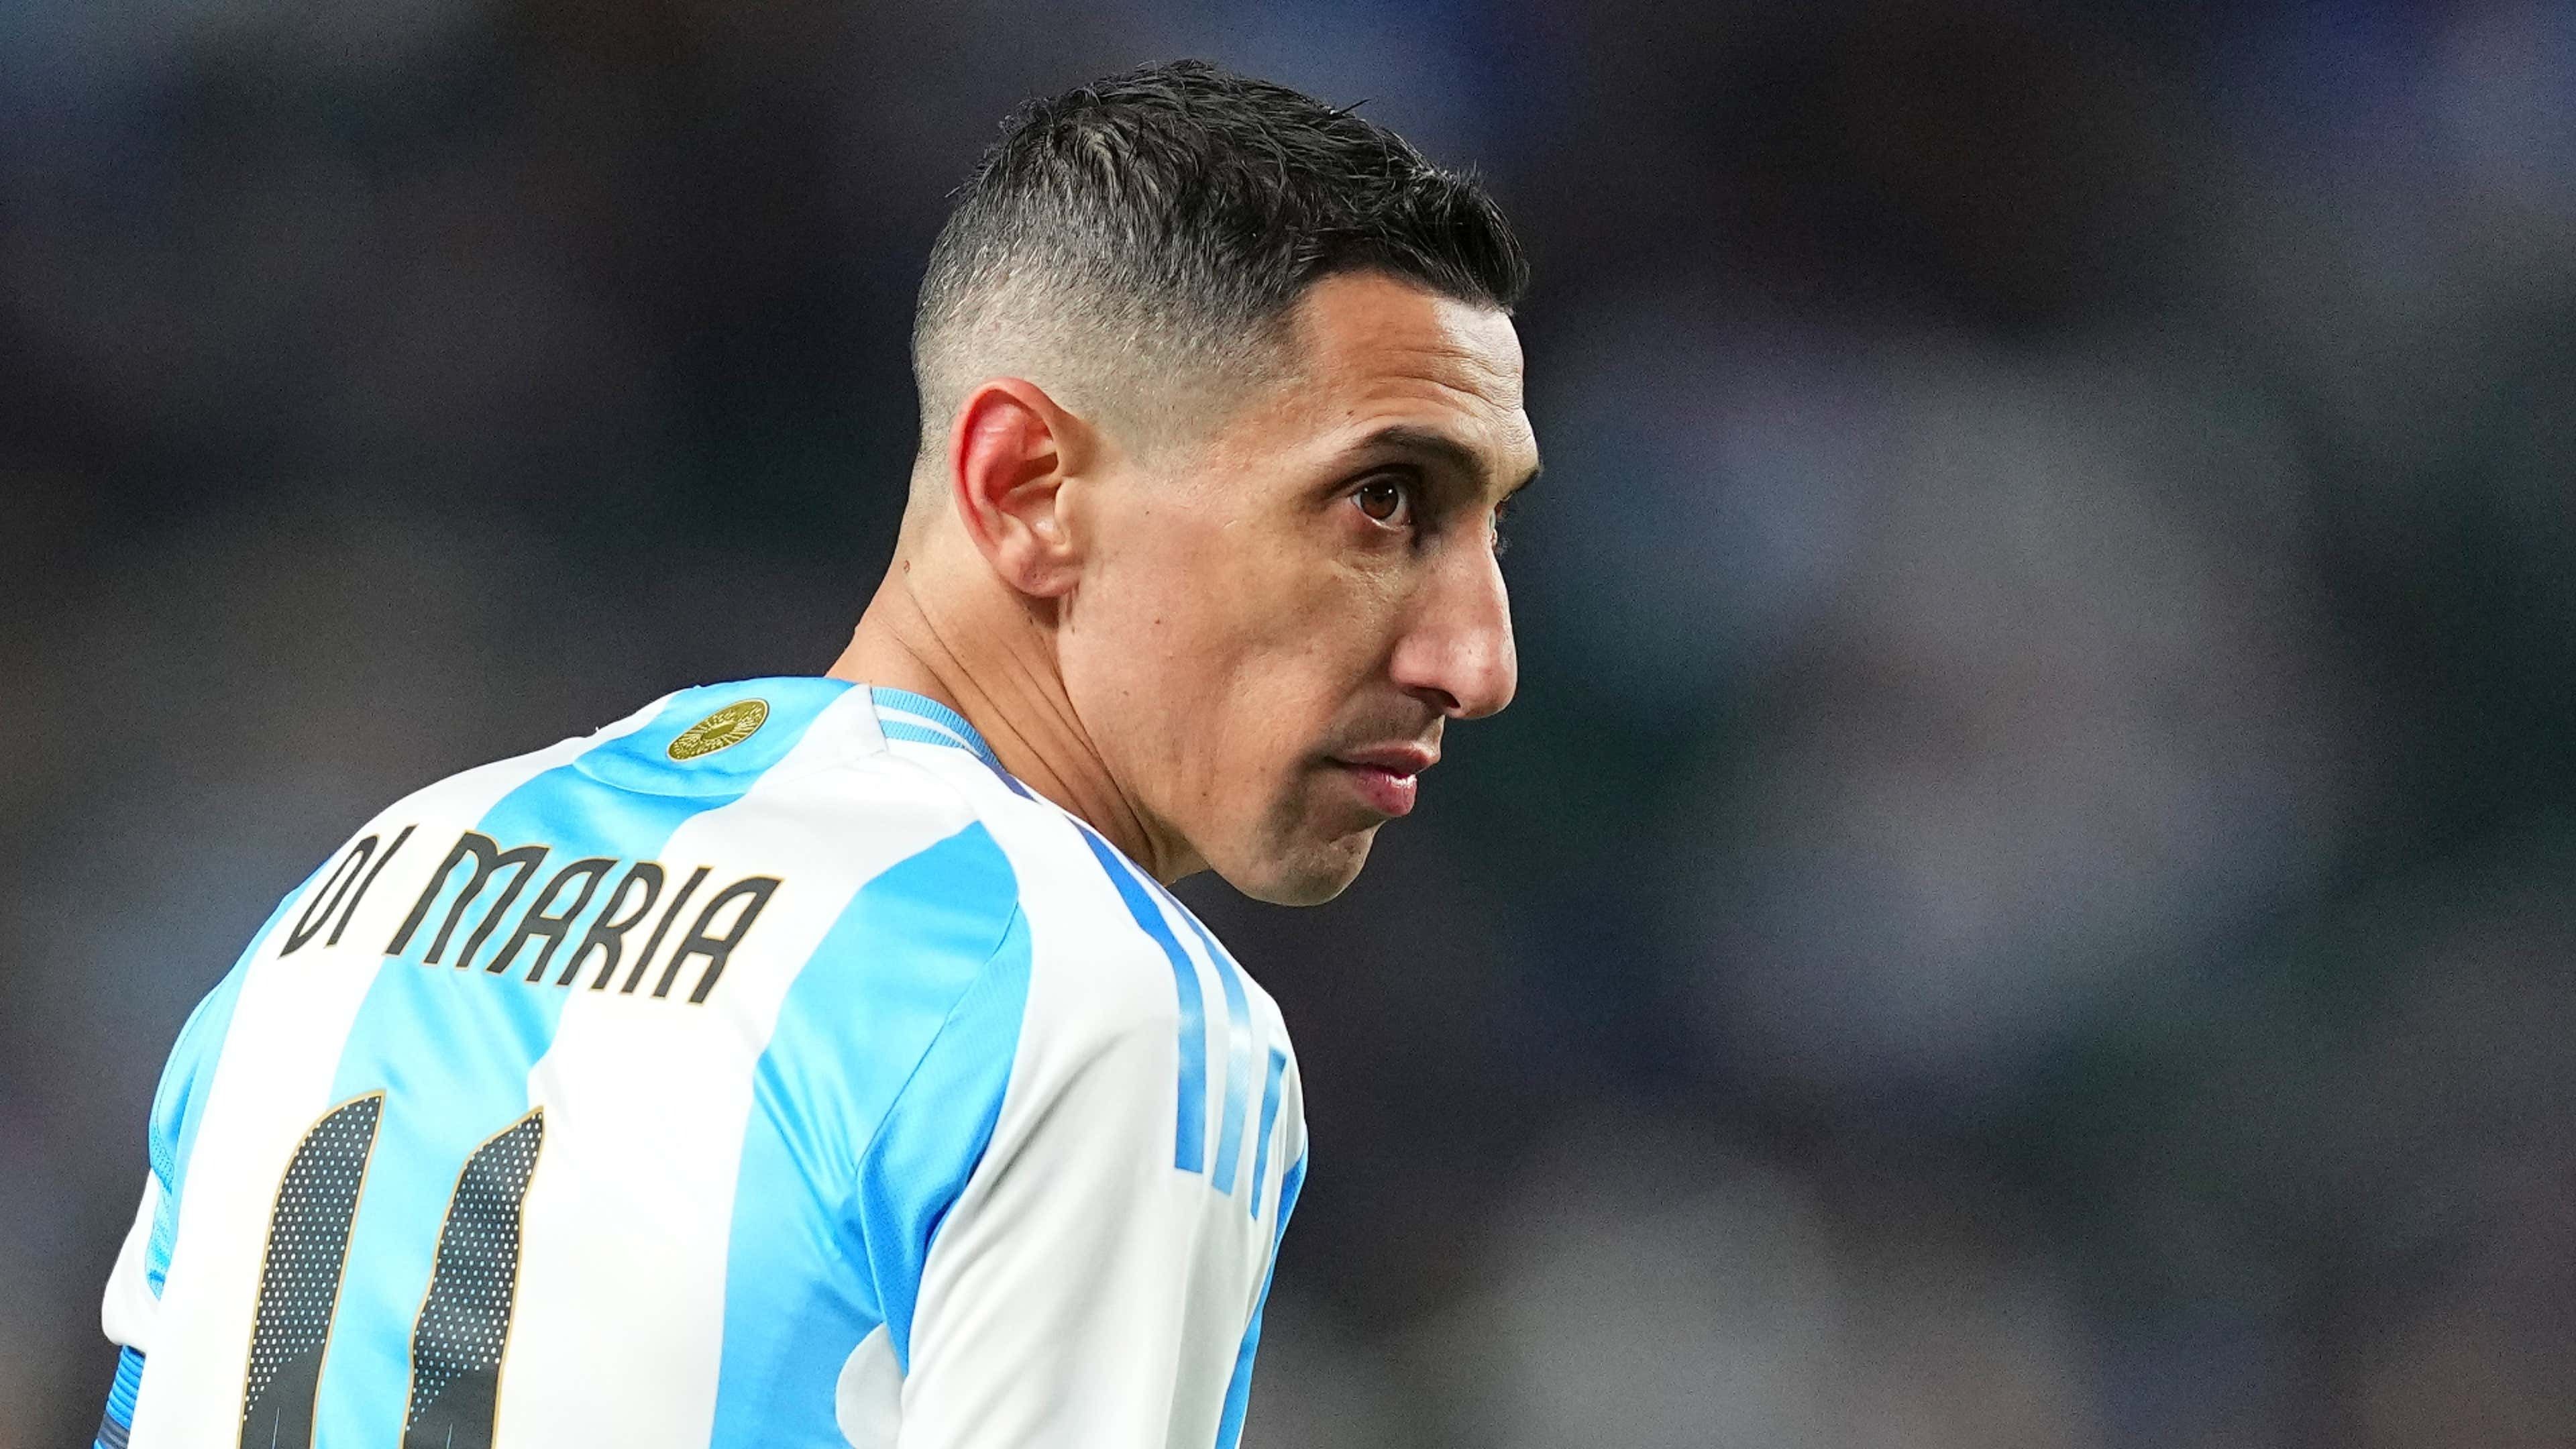 Di Maria Receives Death Threats Over Plans To Return To His Hometown Club